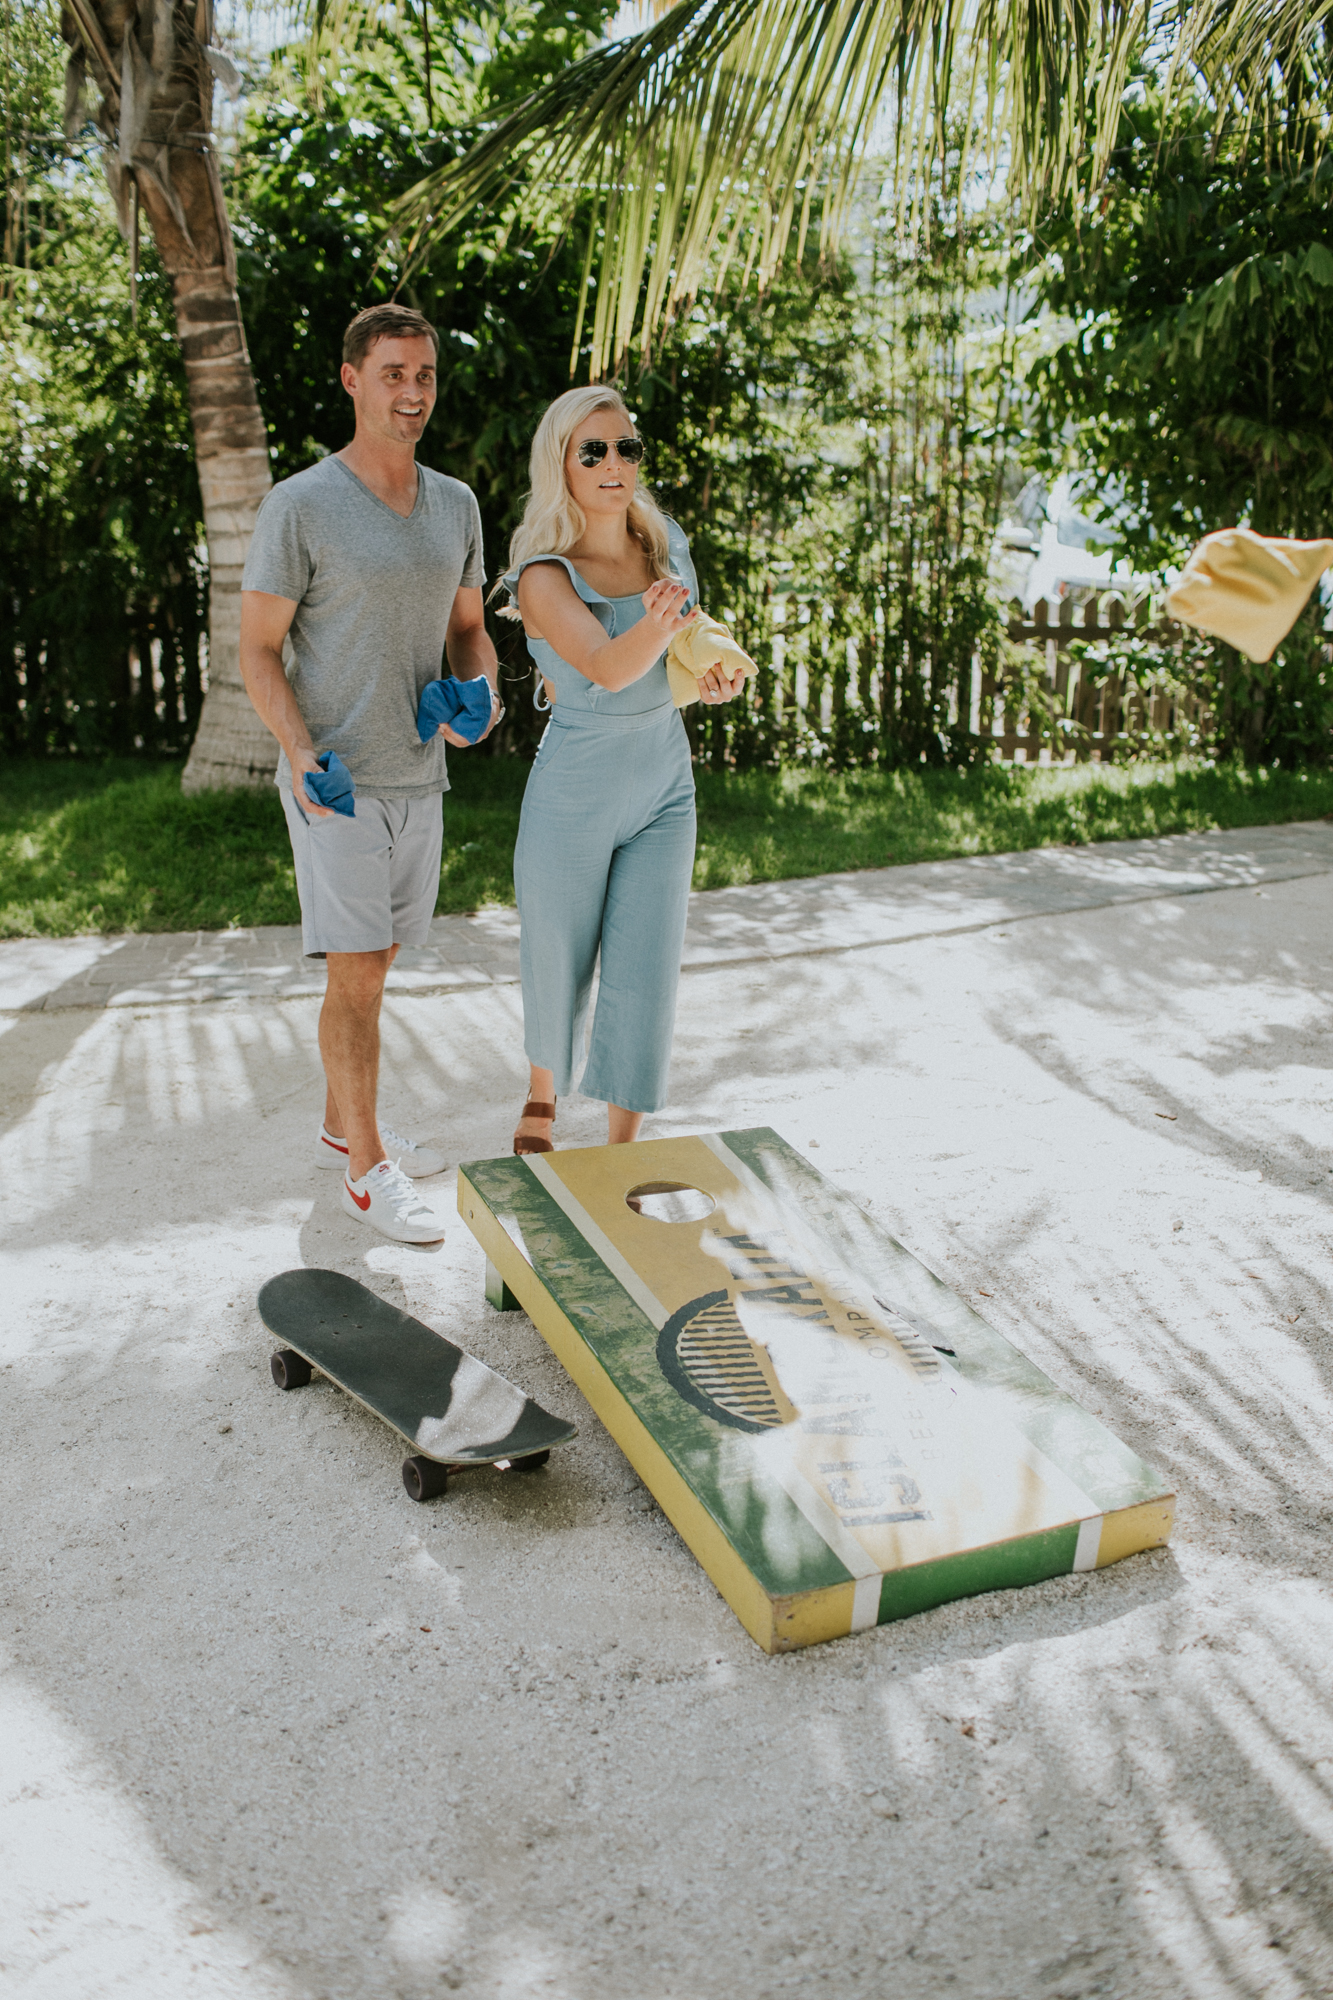 Cornhole game during an engagement shoot in the florida keys